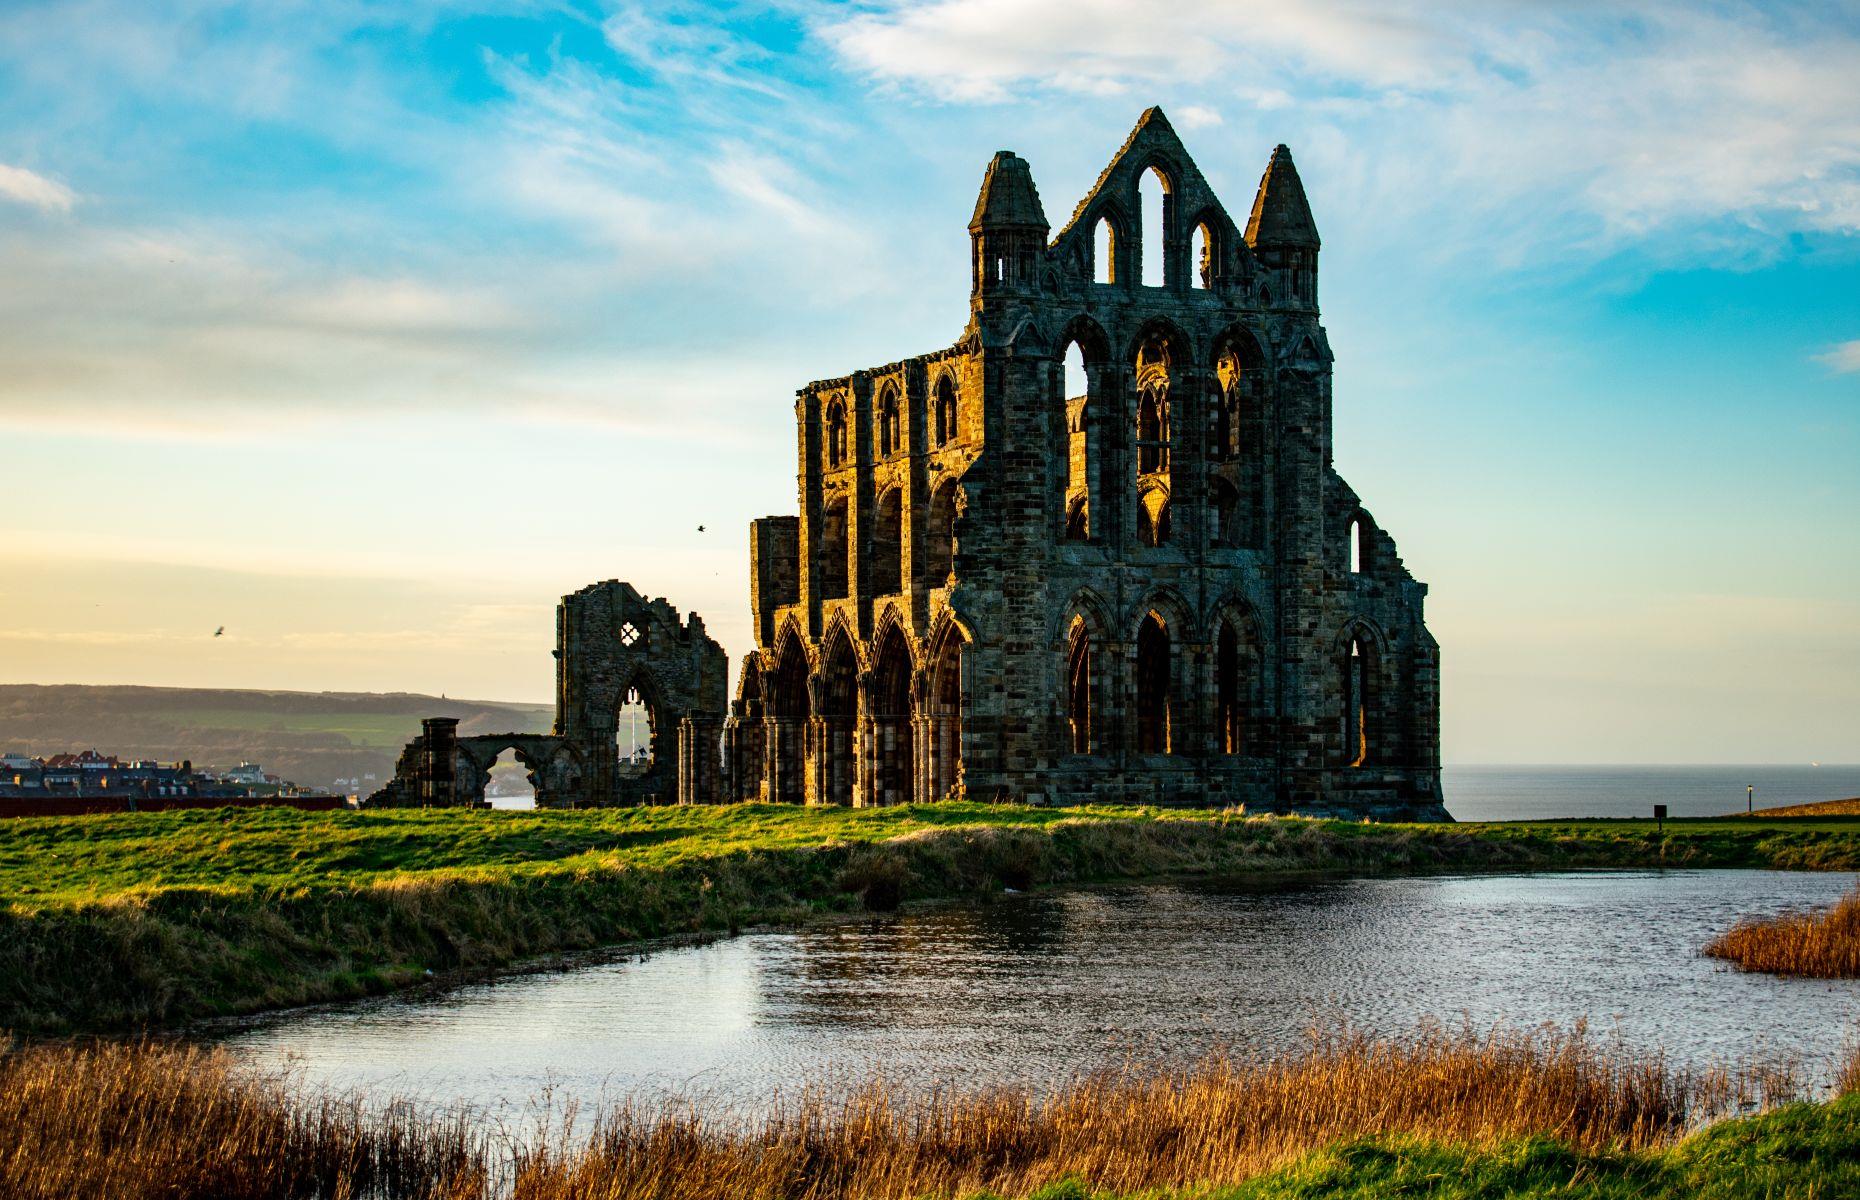 <p>Perched on a cliff overlooking the North Sea, the imposing façade of <a href="https://www.english-heritage.org.uk/visit/places/whitby-abbey/">Whitby Abbey</a> is one of the most celebrated sights in North Yorkshire. The construction of the first Gothic church began around 1225 but, due to lack of funds, it was only finished a few centuries later. The abbey was forced to close in the mid-16th century following the dissolution of monasteries and was stripped away. Bad weather, along with bombardment during the Second World War, has eroded much of the abbey’s remains, giving it a hauntingly beautiful and suitably Gothic appearance.</p>